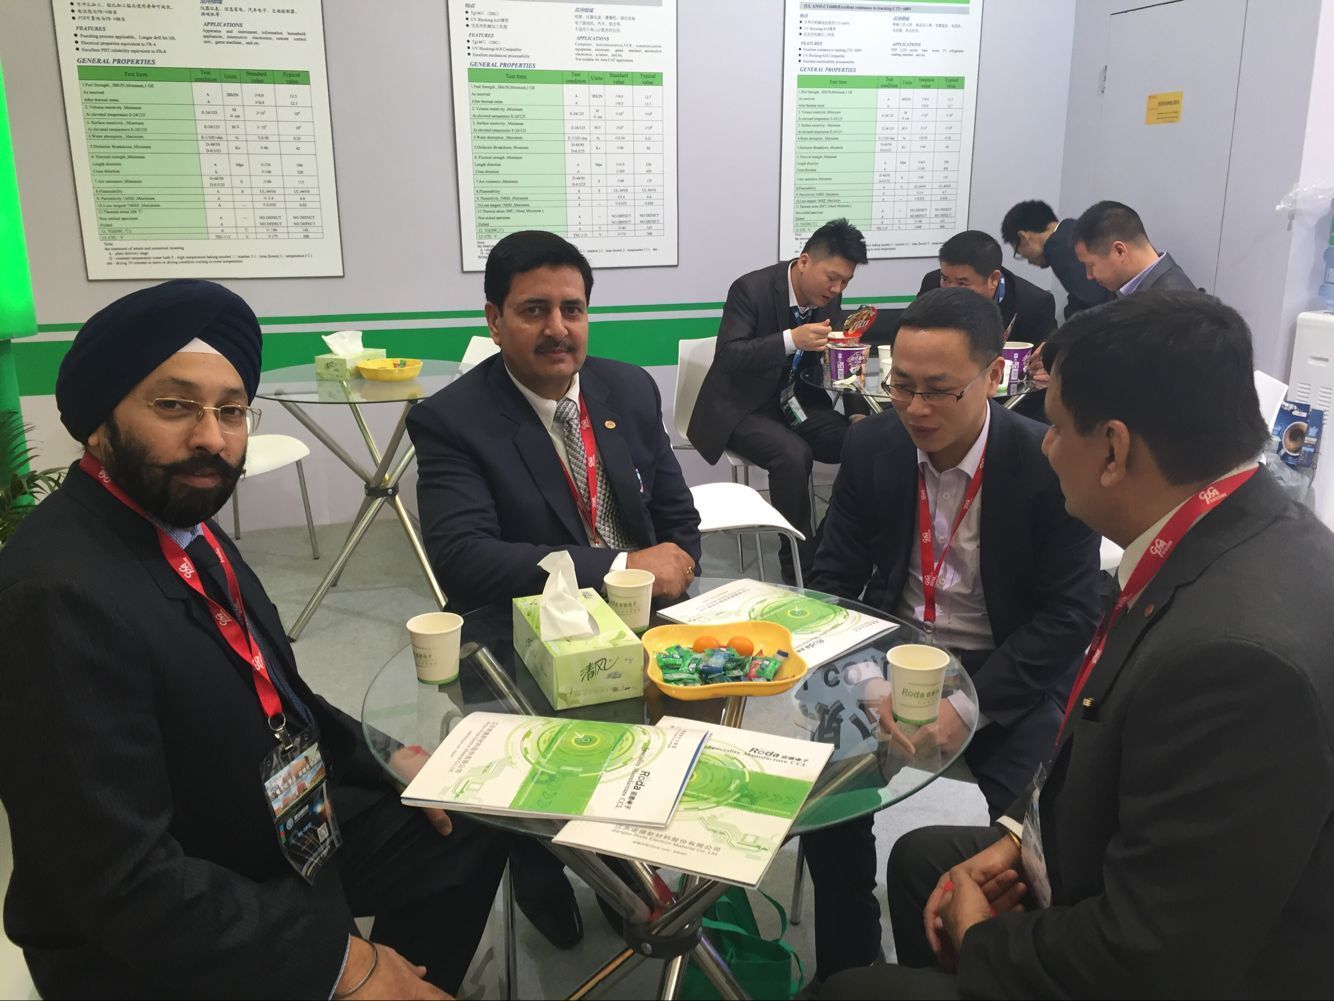 Review of the March 2016 Shanghai CPCA Exhibition